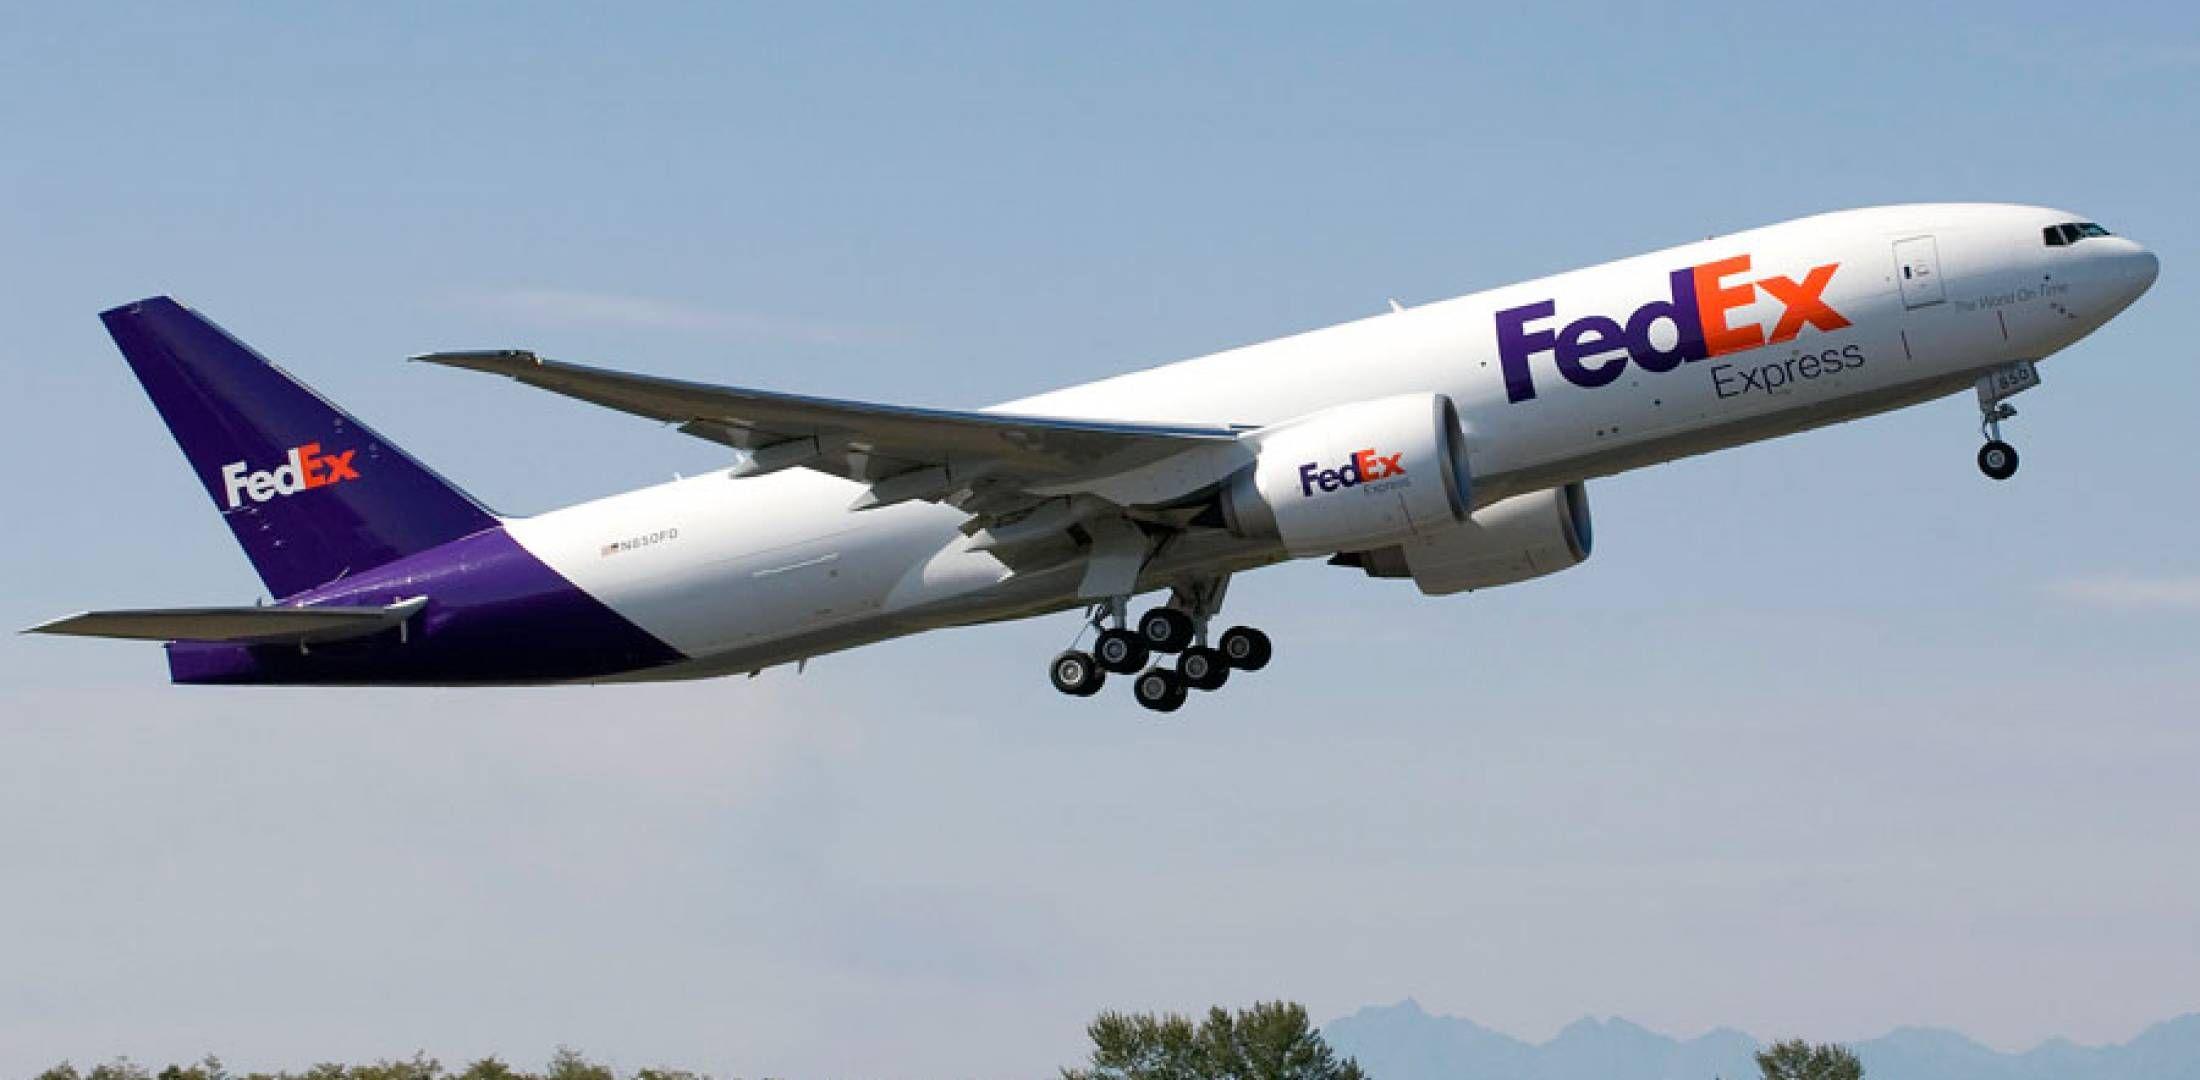 FedEx Airlines Logo - FedEx Express To Launch Data Comm Trials in November. Air Transport